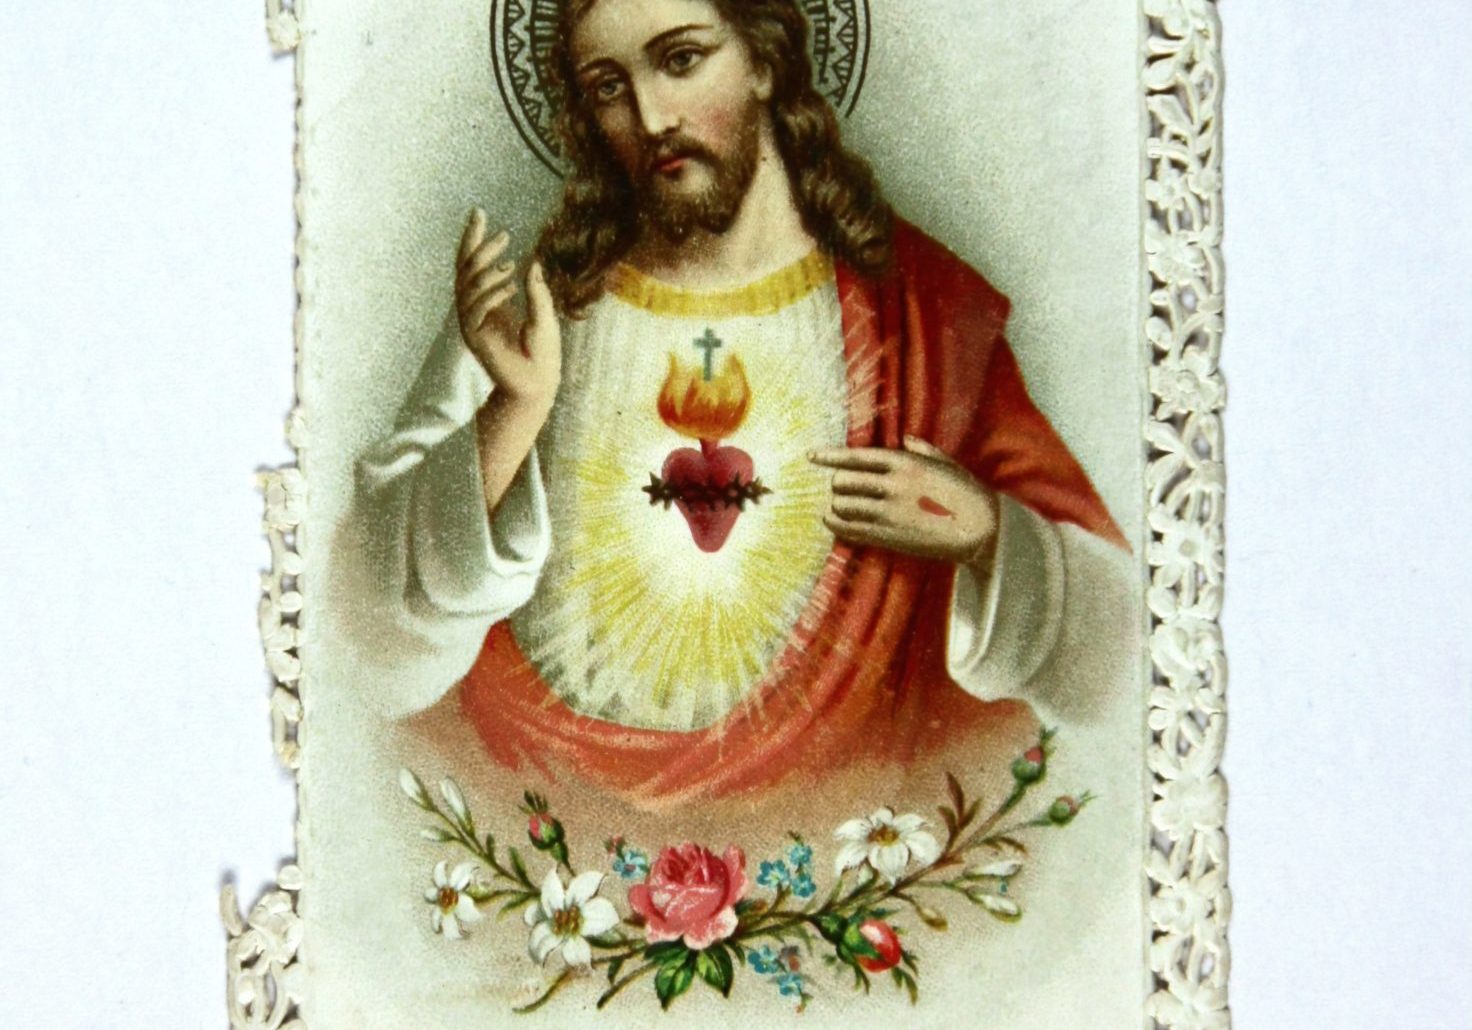 Sacred Heart Photo By Museums Victoria On Insplash